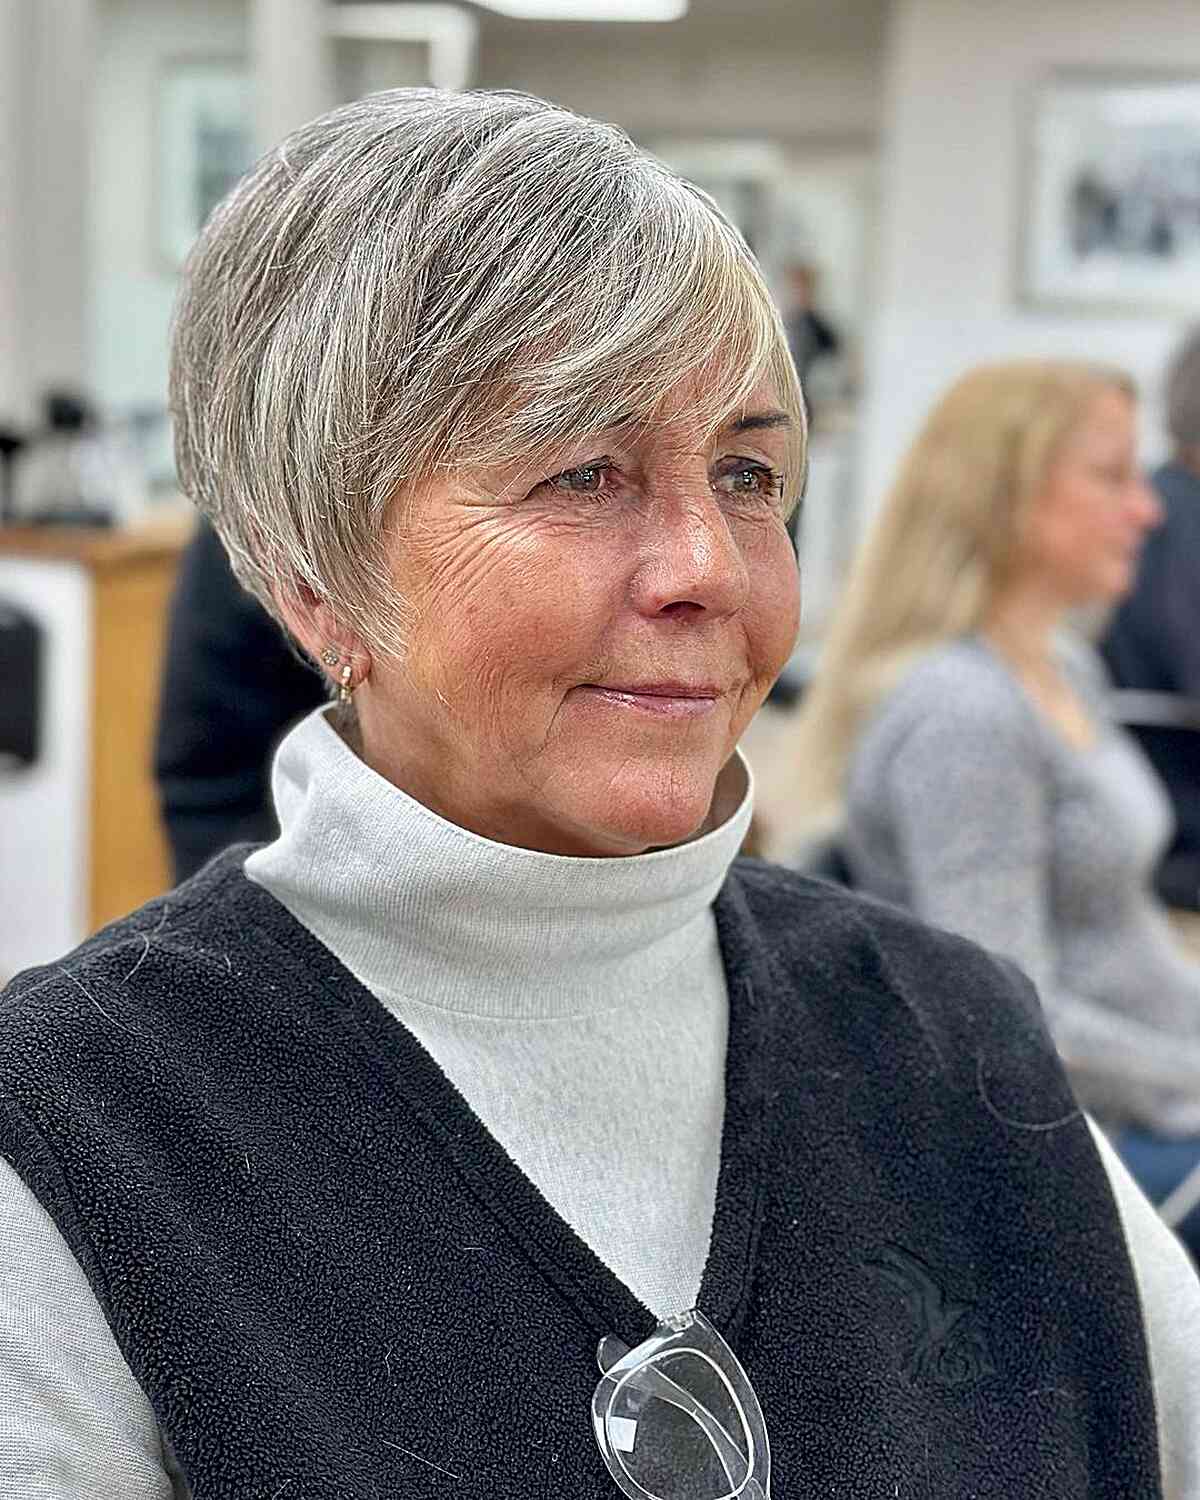 Choppy Angled Pixie Cut with Side Bangs on Older Women Over Seventy